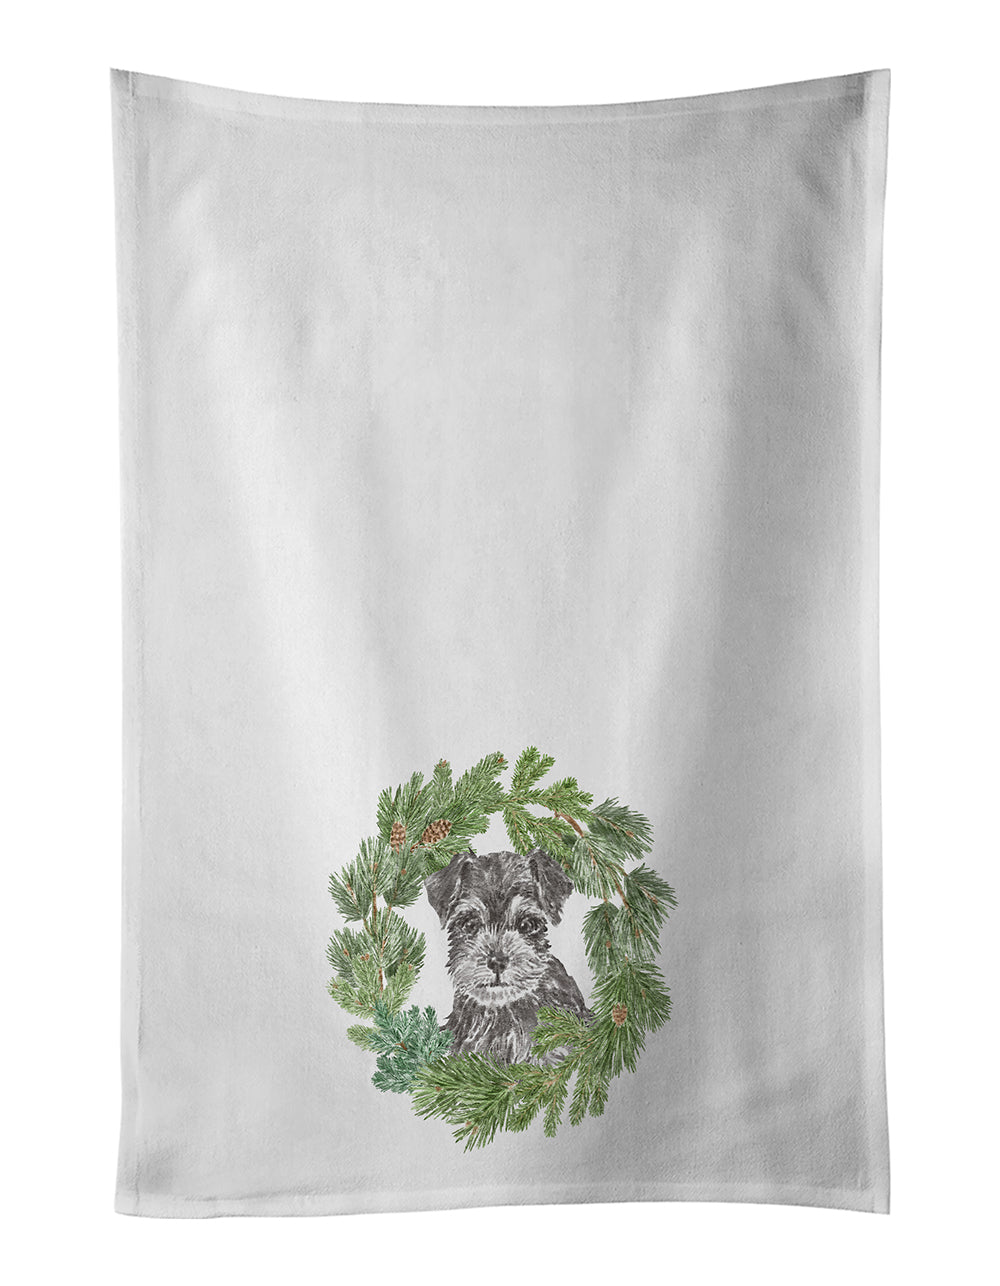 Buy this Schnauzer Puppy Black and Silver Christmas Wreath White Kitchen Towel Set of 2